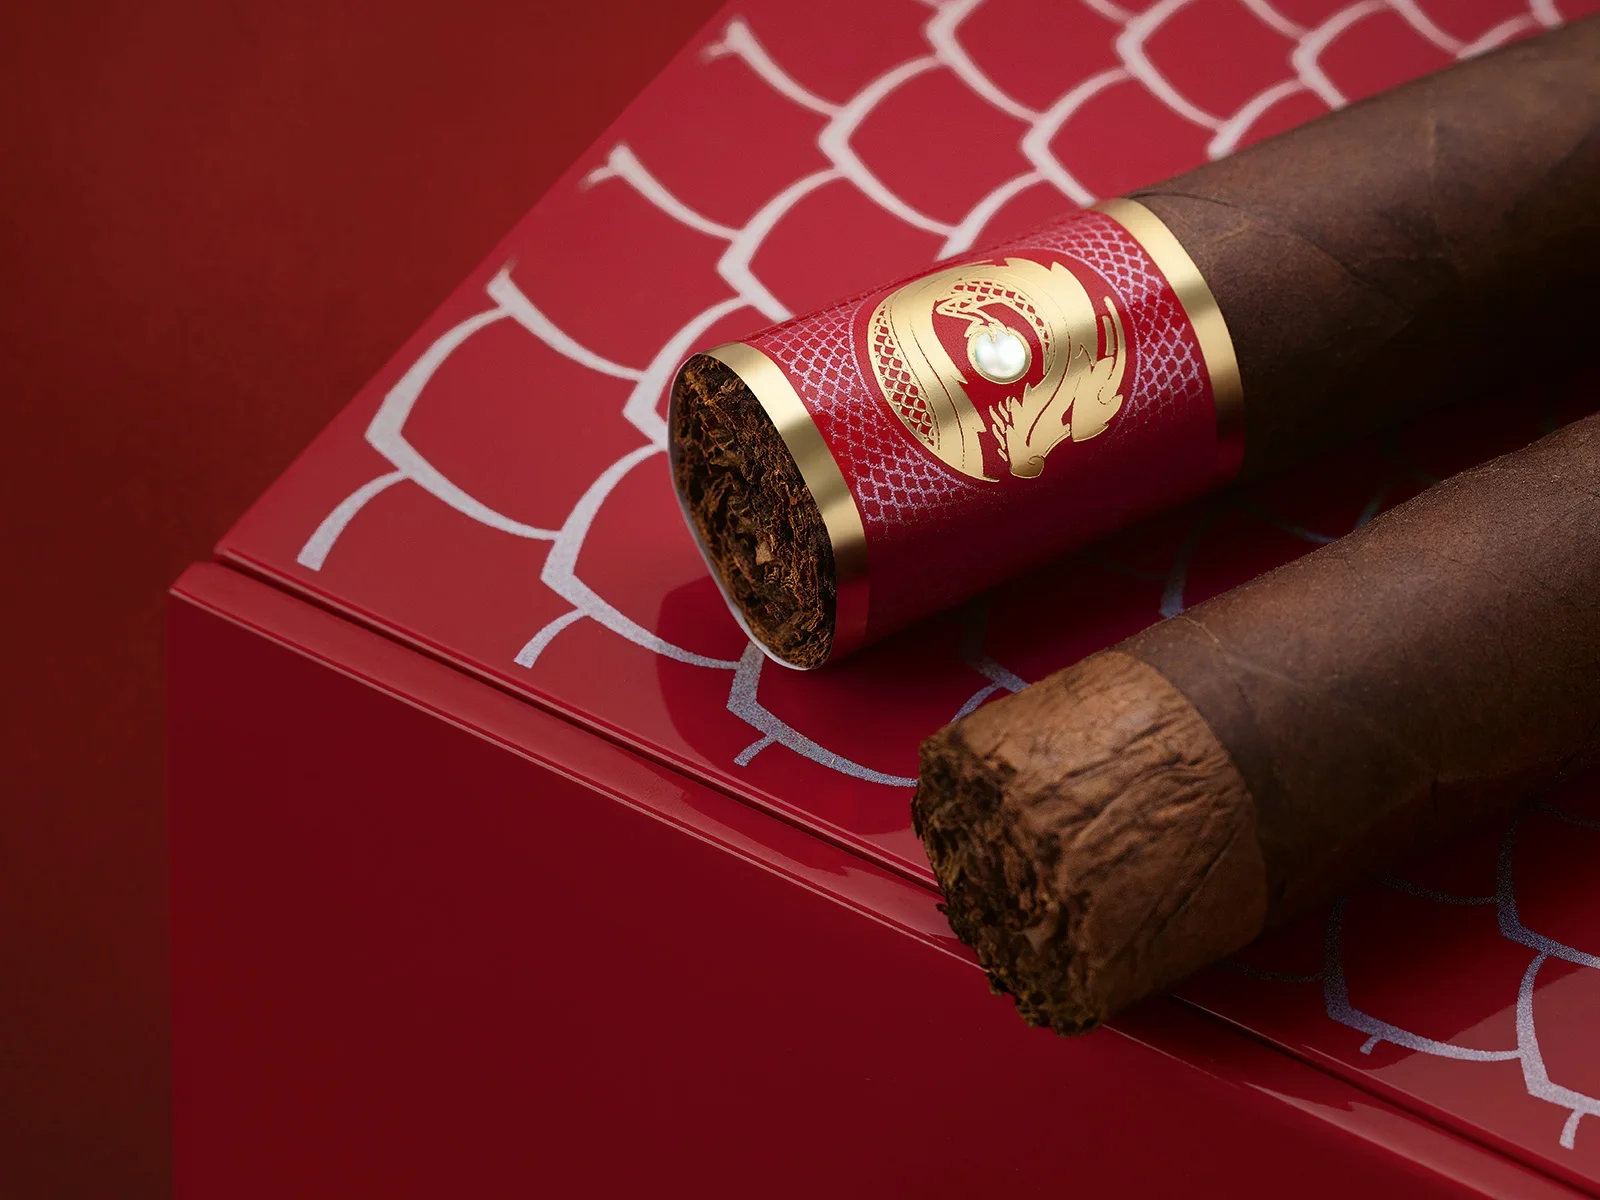 Detailshot of 2 Davidoff Year of the Dragon cigars, one with the foot ring and one without on top of the cigar box 